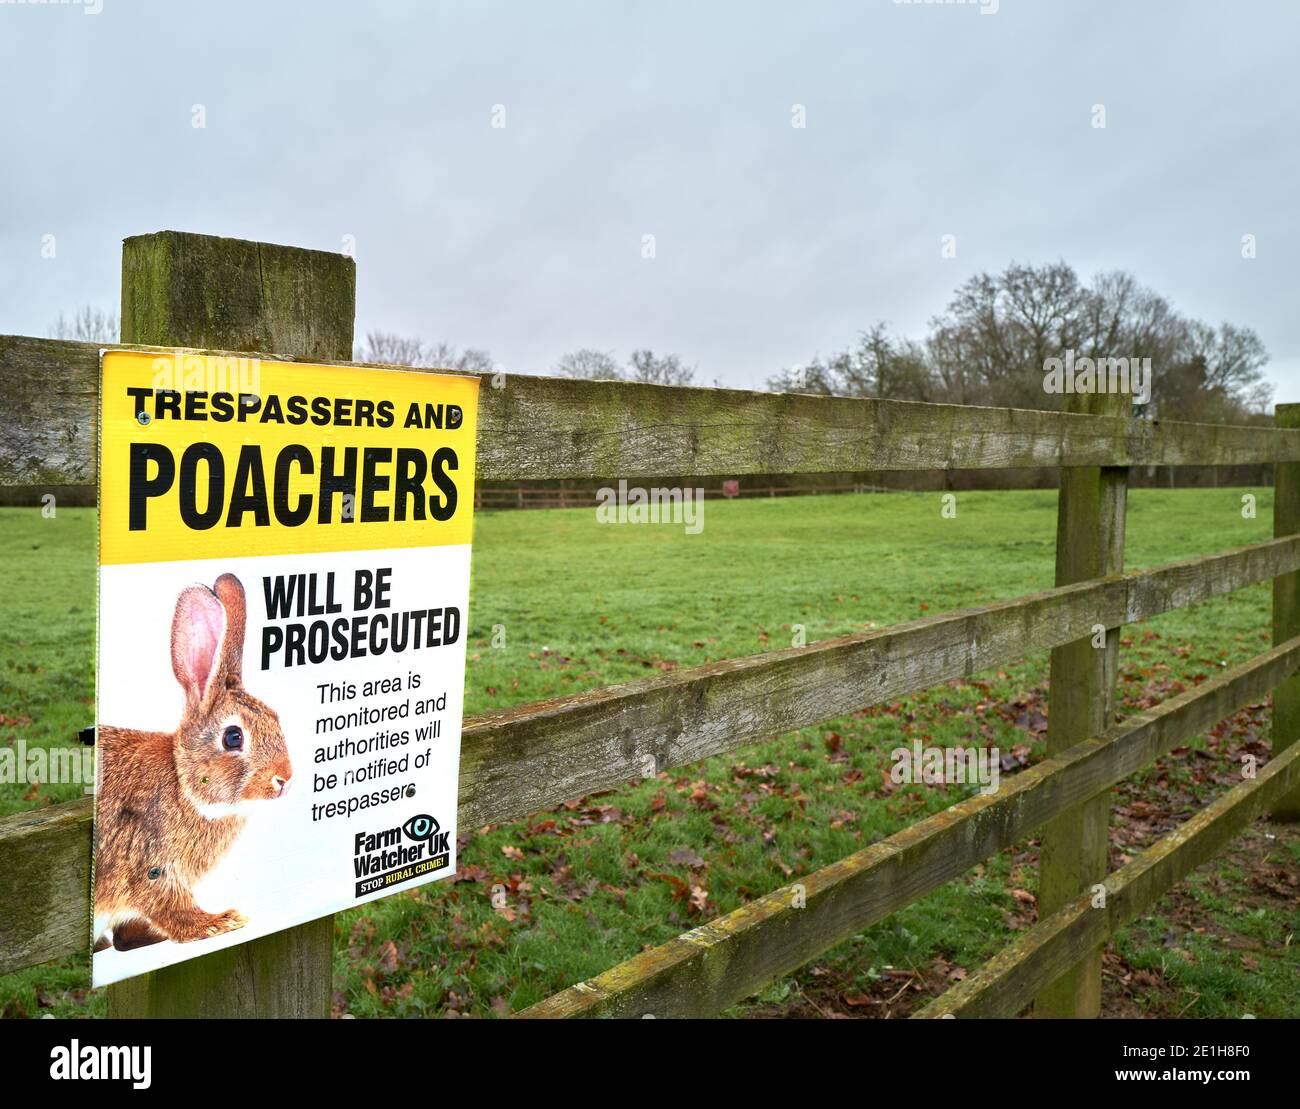 'Trespassers and poachers will be prosecuted' notice on a fence bordering a meadow at Kettering, Nhants, England. Stock Photo